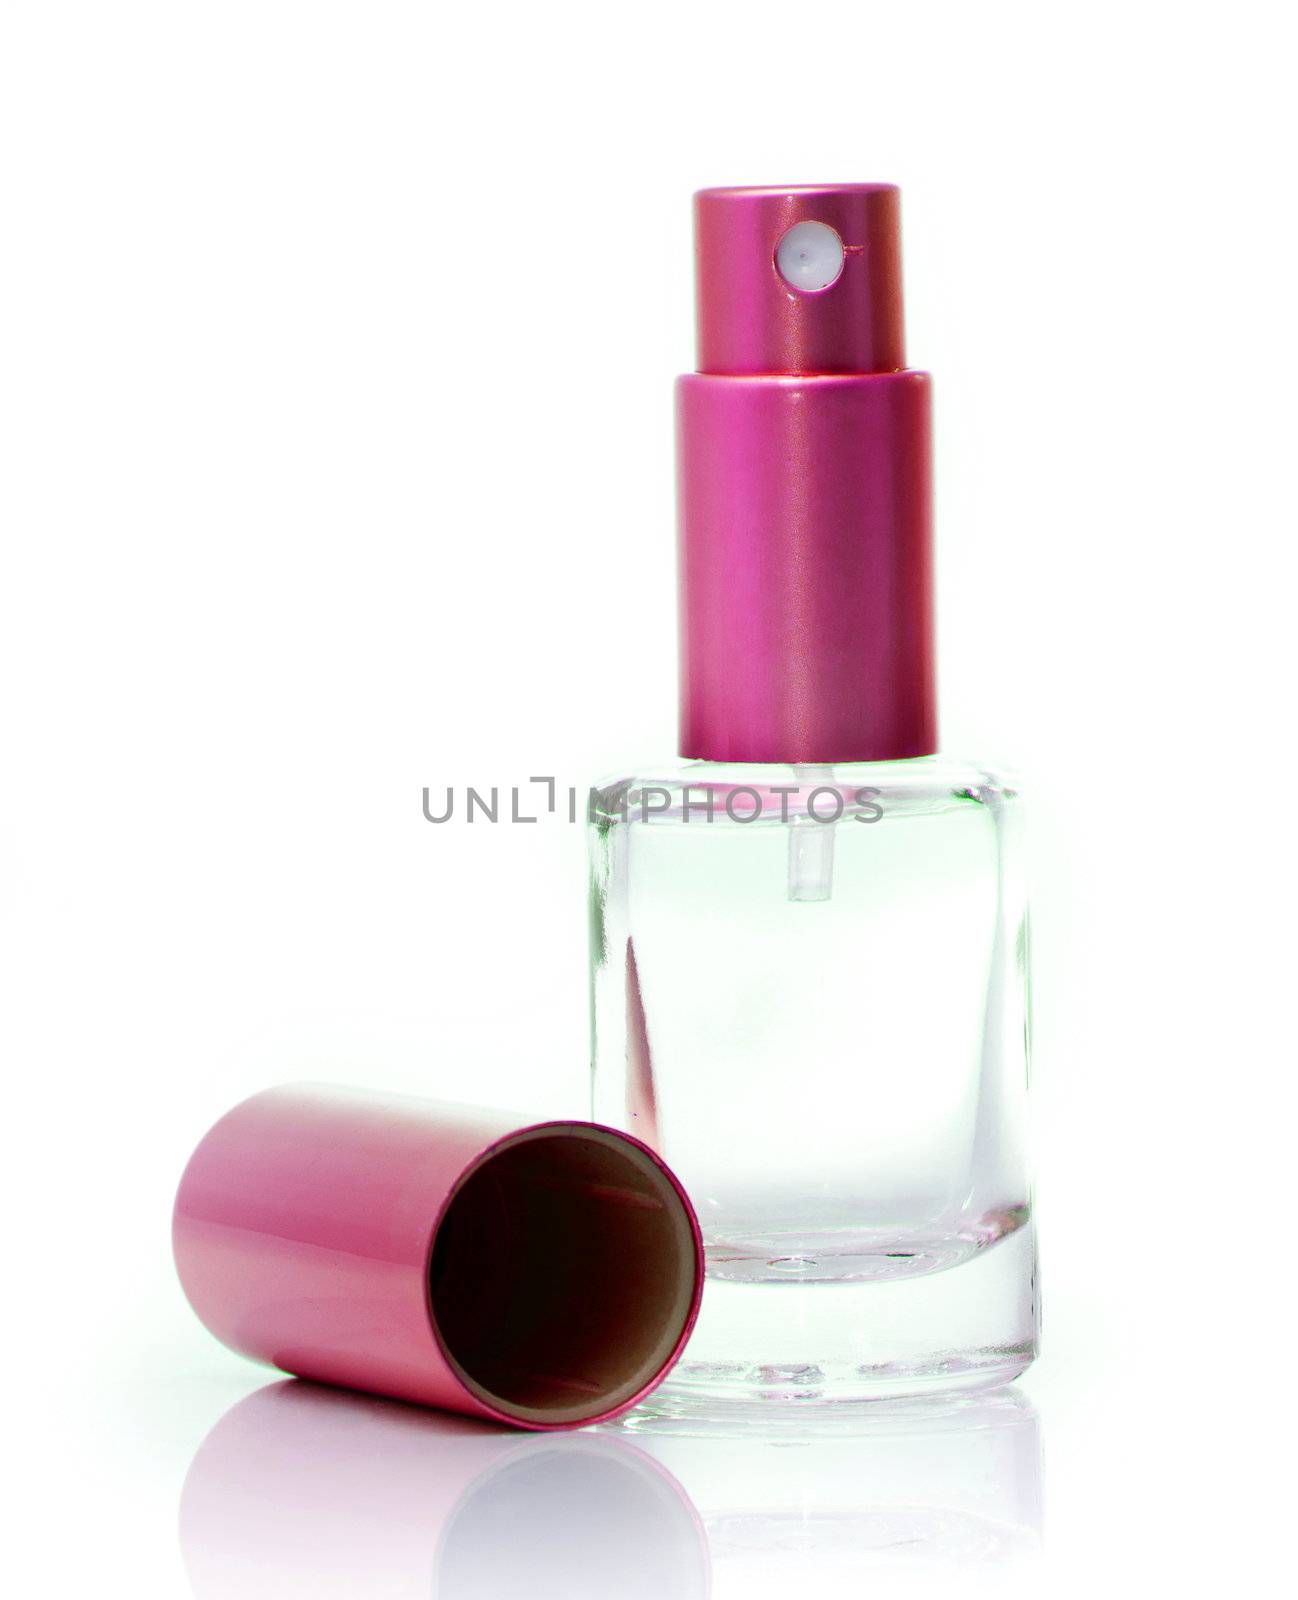 empty red glass perfume bottle on a white backgroung